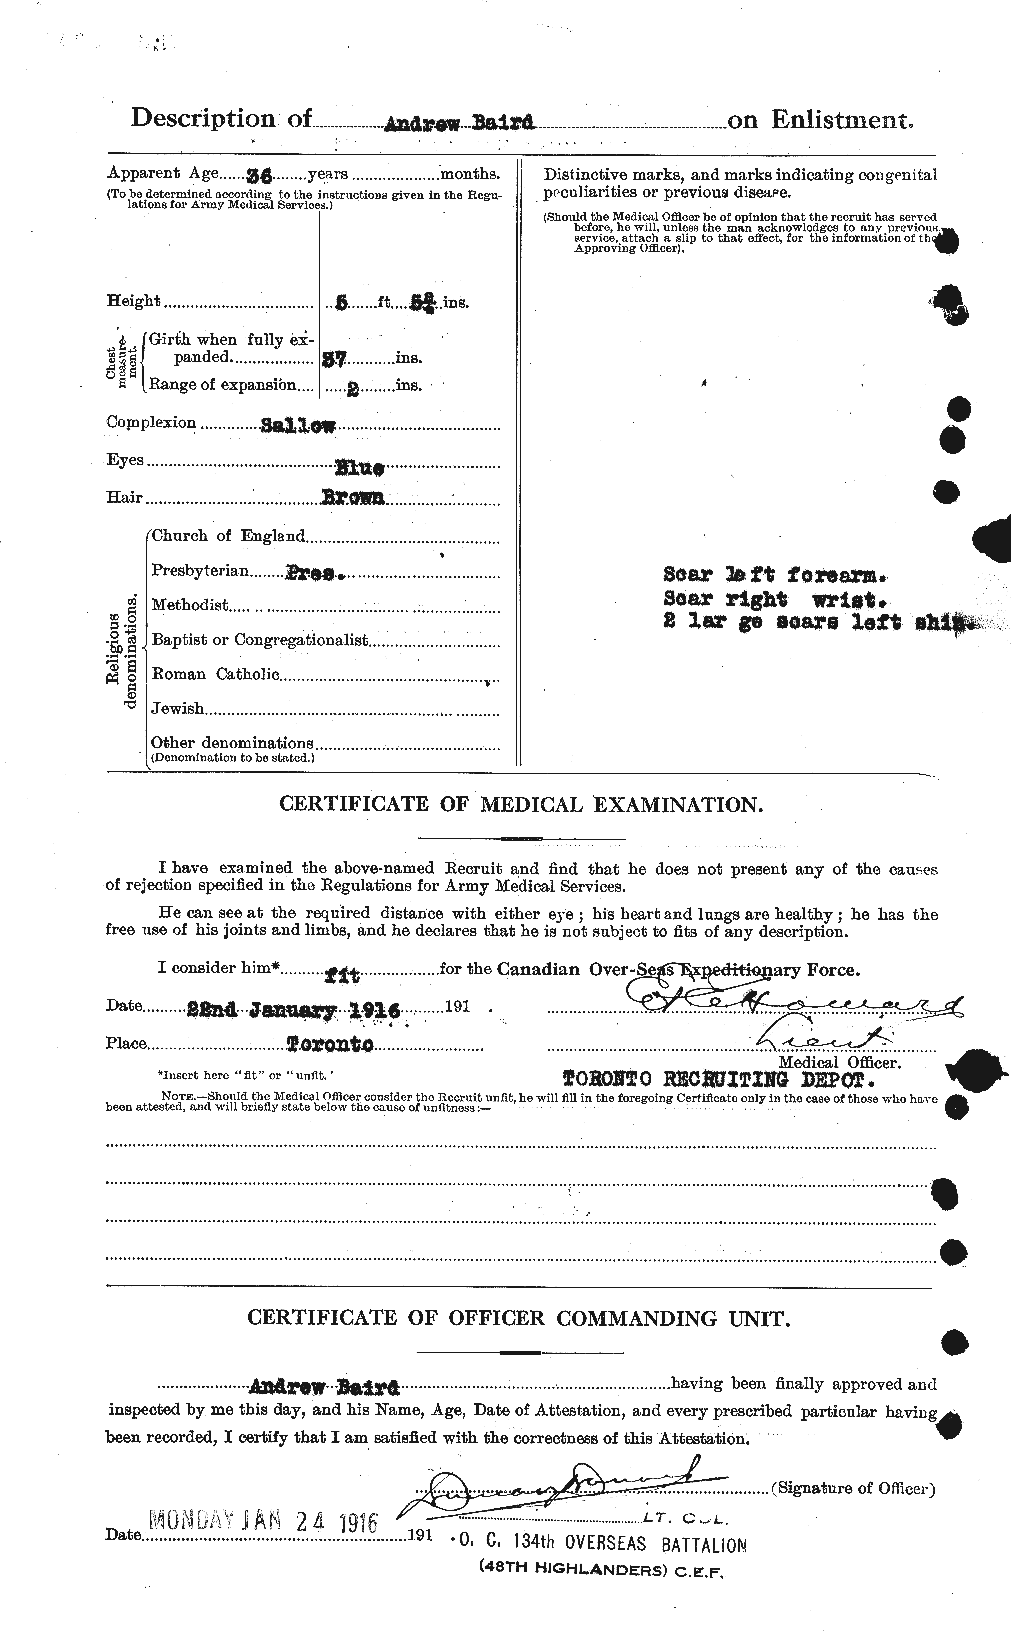 Personnel Records of the First World War - CEF 226732b